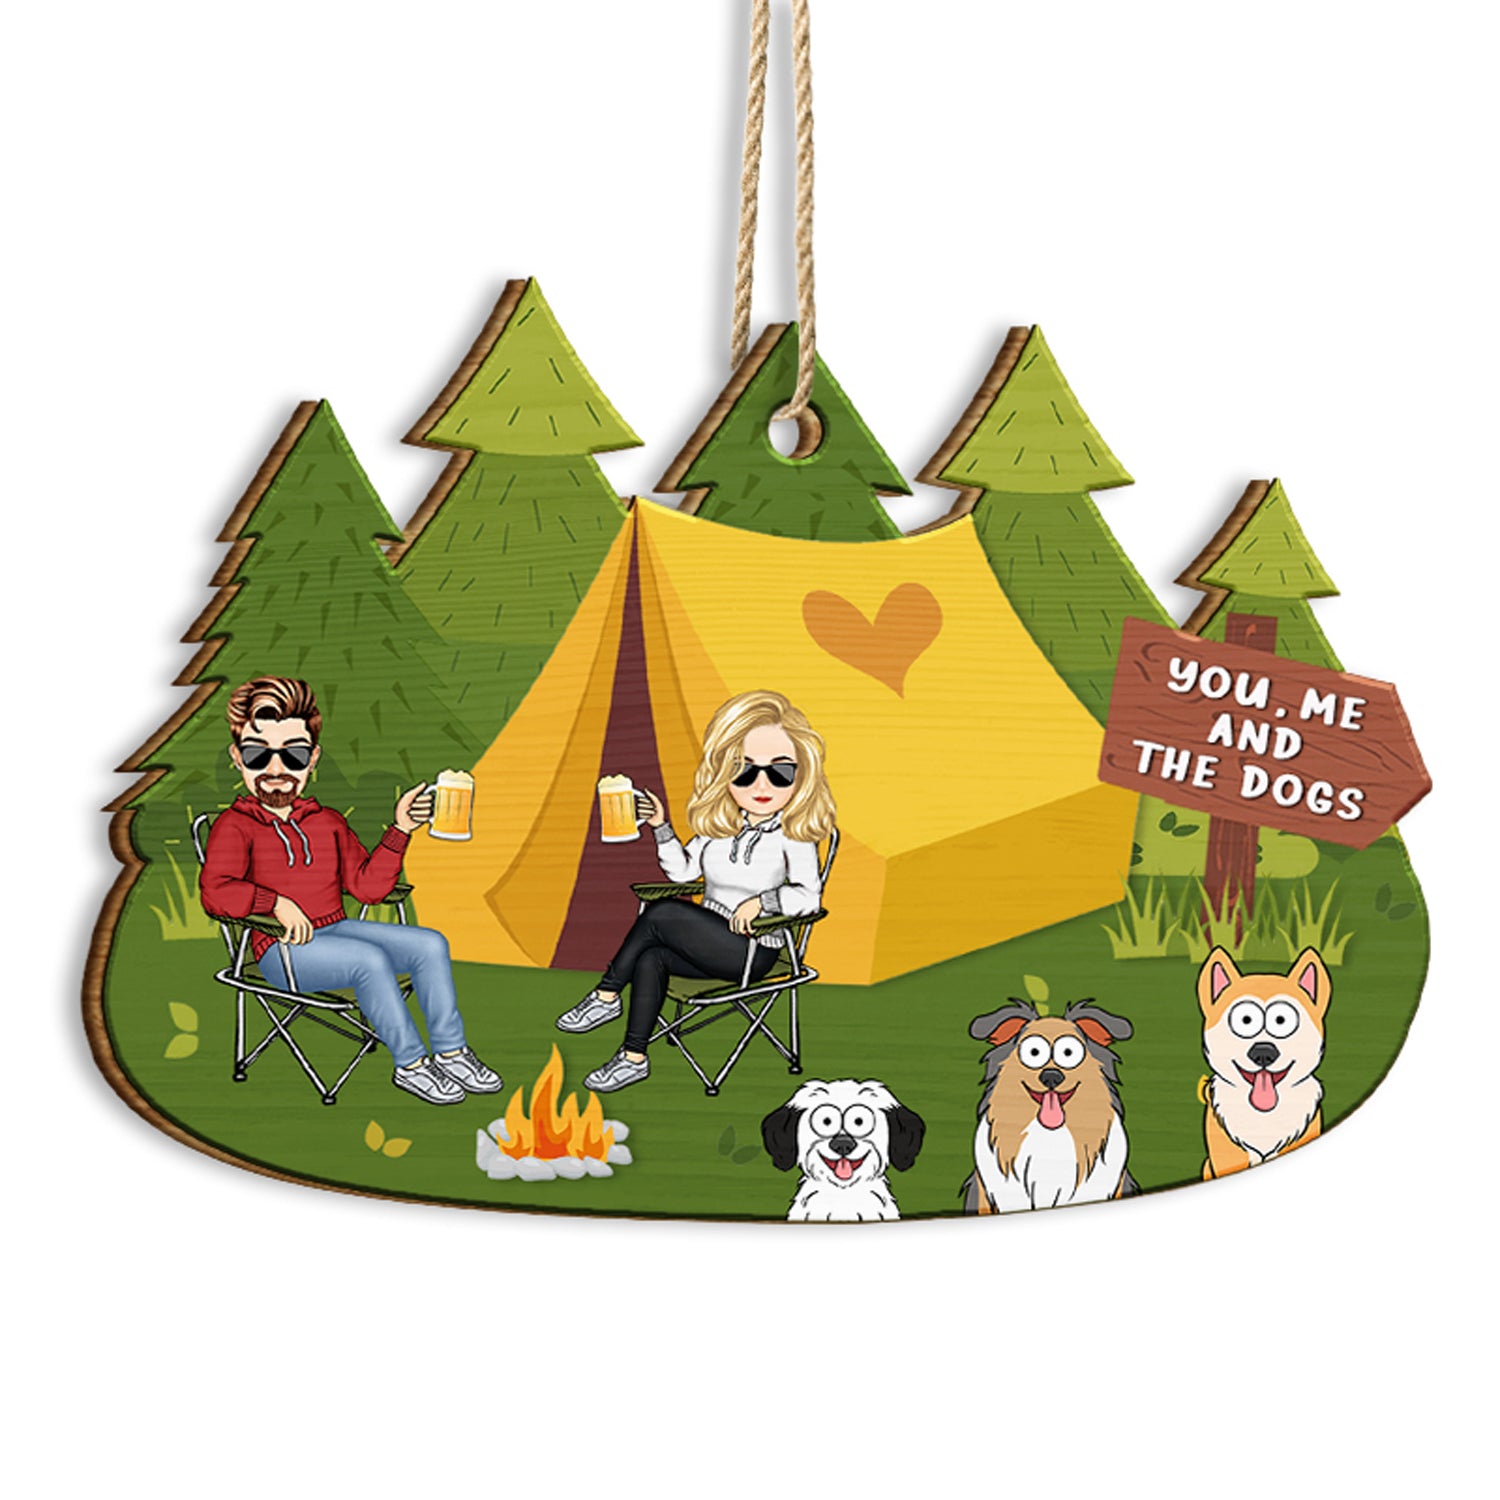 Camping You Me And The Dogs - Christmas Gift For Couples - Personalized Custom Shaped Wooden Ornament